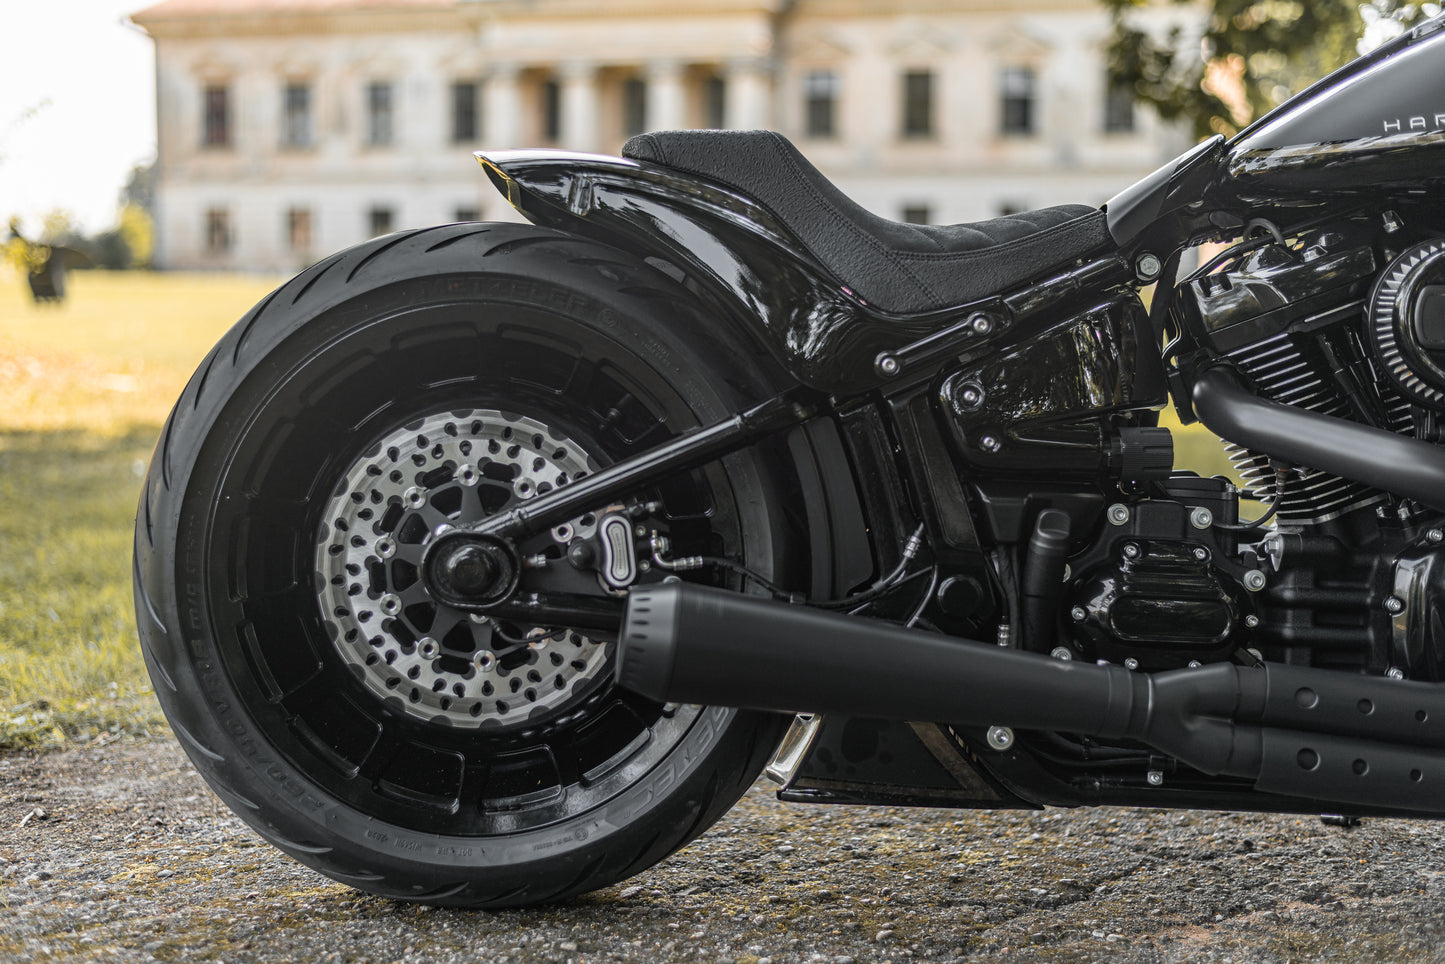 Harley Davidson motorcycle with Killer Custom "Avenger" rear fender kit from the side with an old mansion in the background